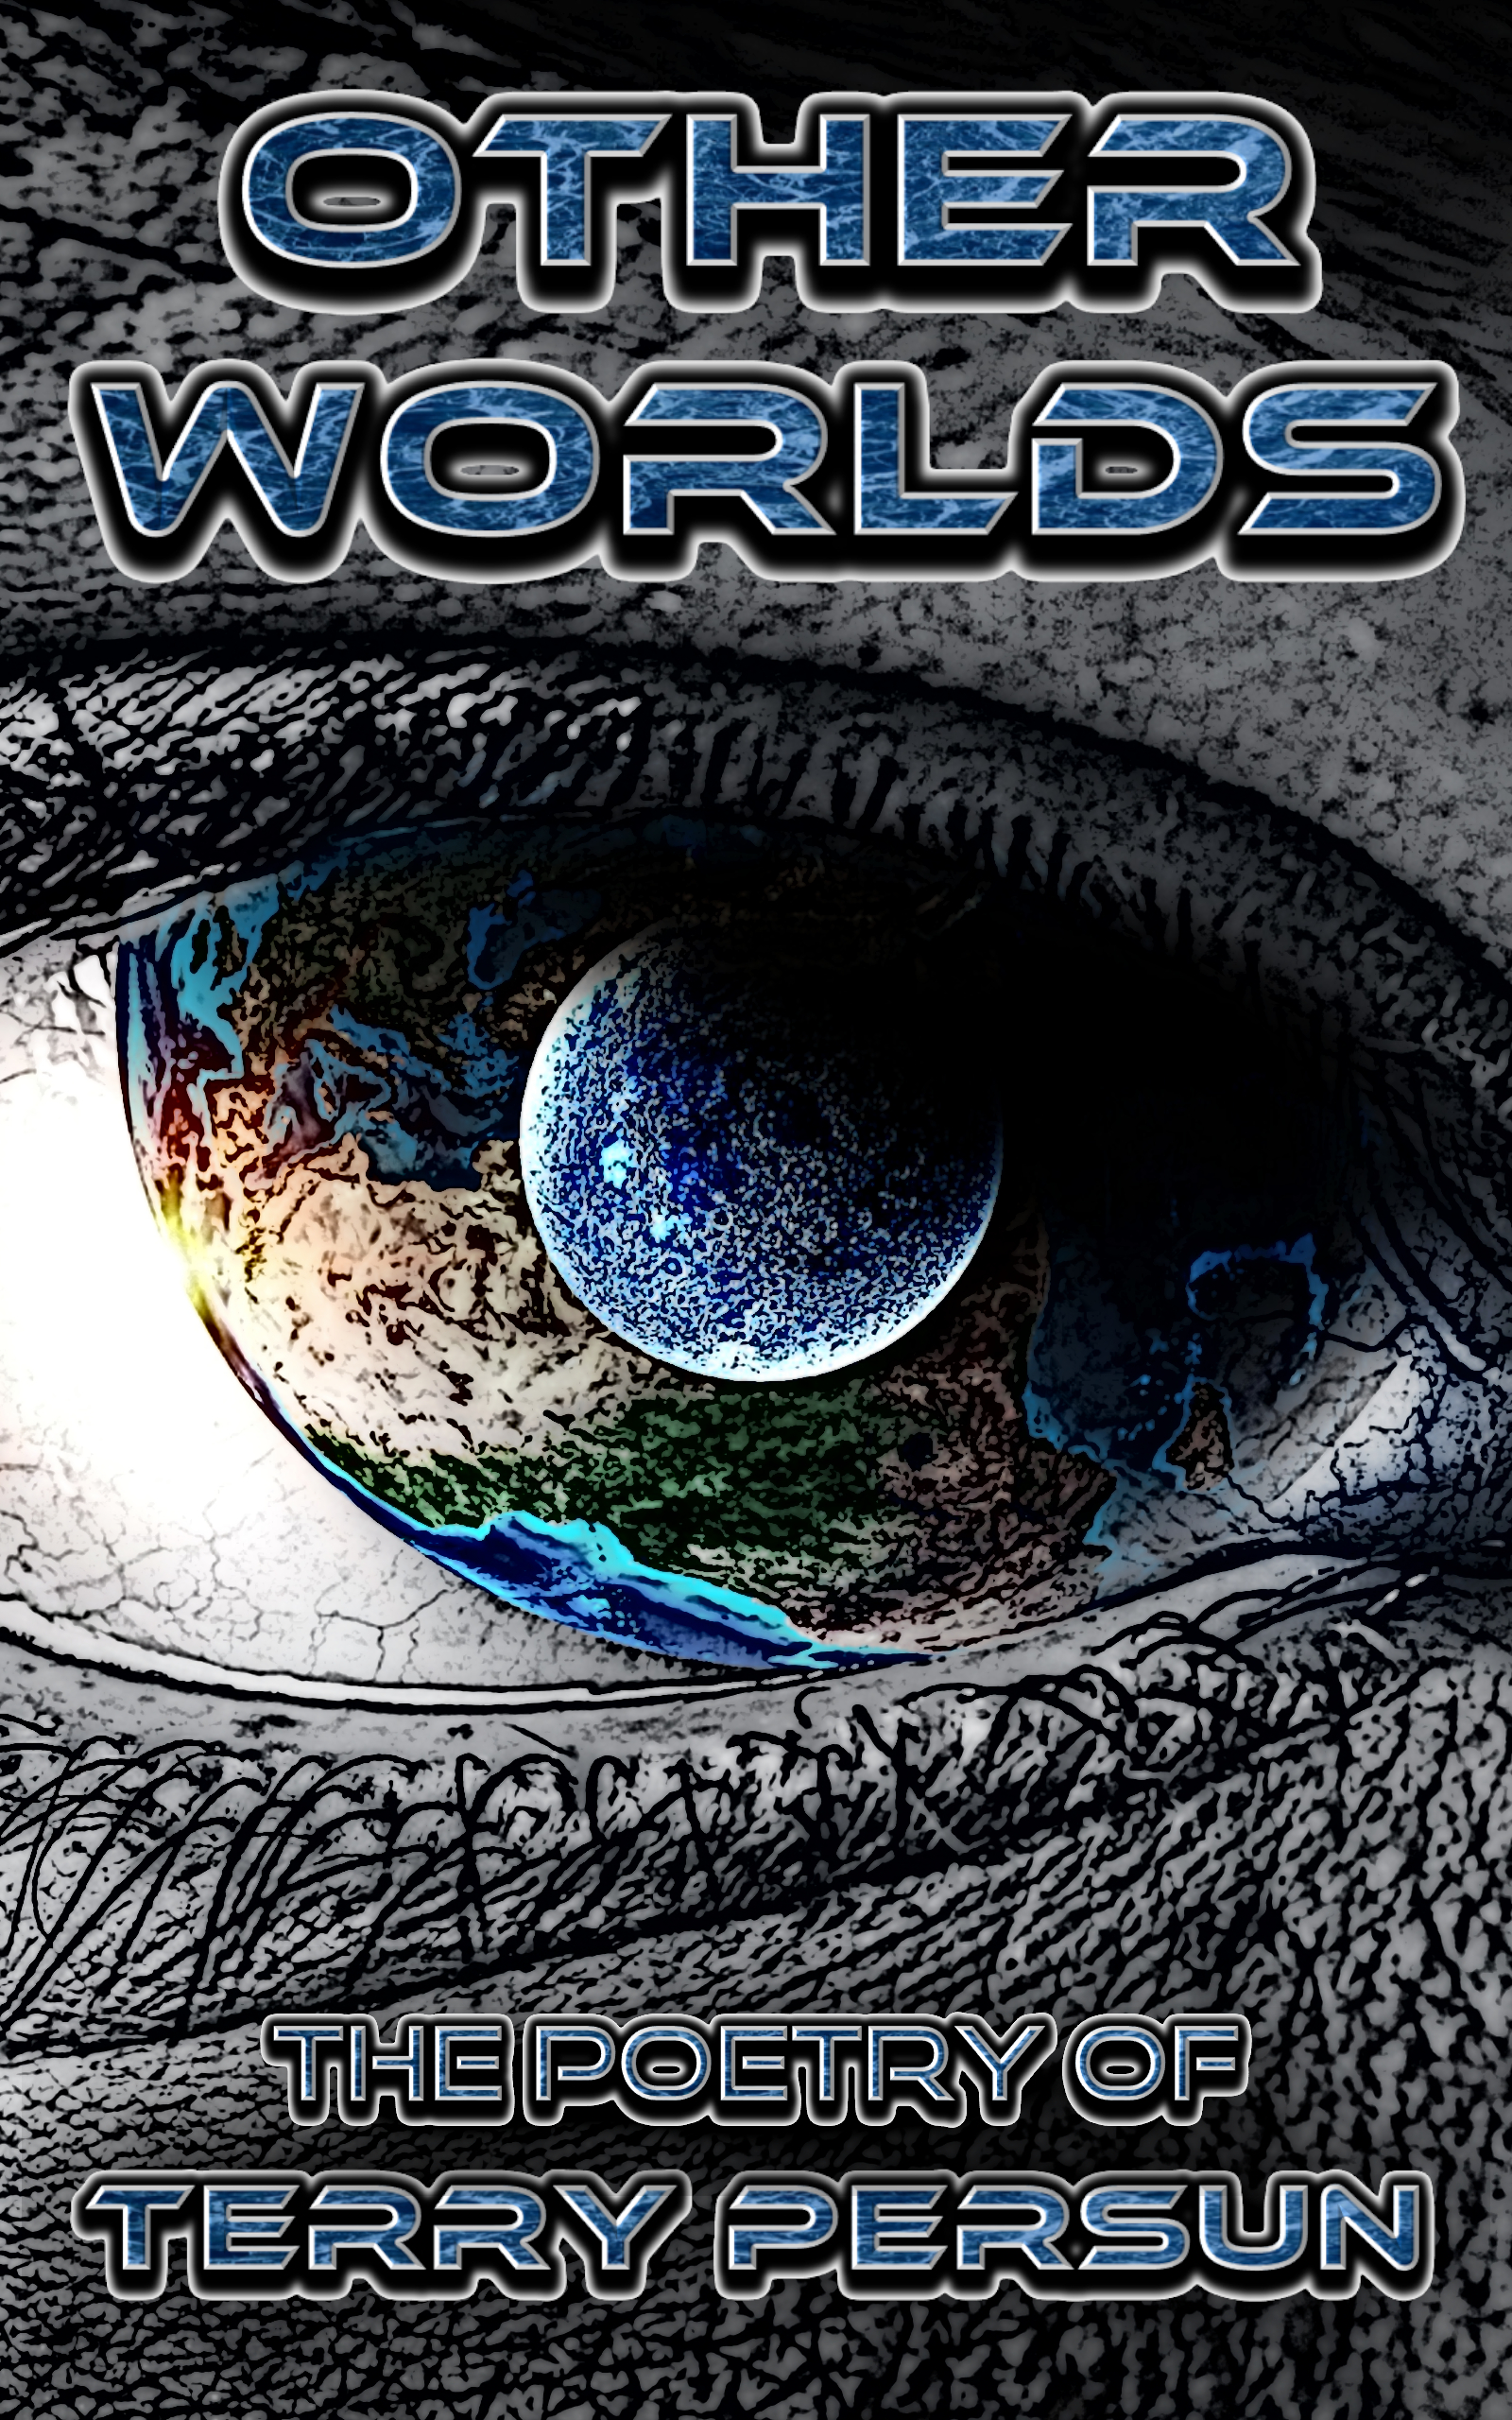 How about a little reading fix for the weekend? Other Worlds, a hot new Science Fiction poetry collection by Terry Persun is out today!